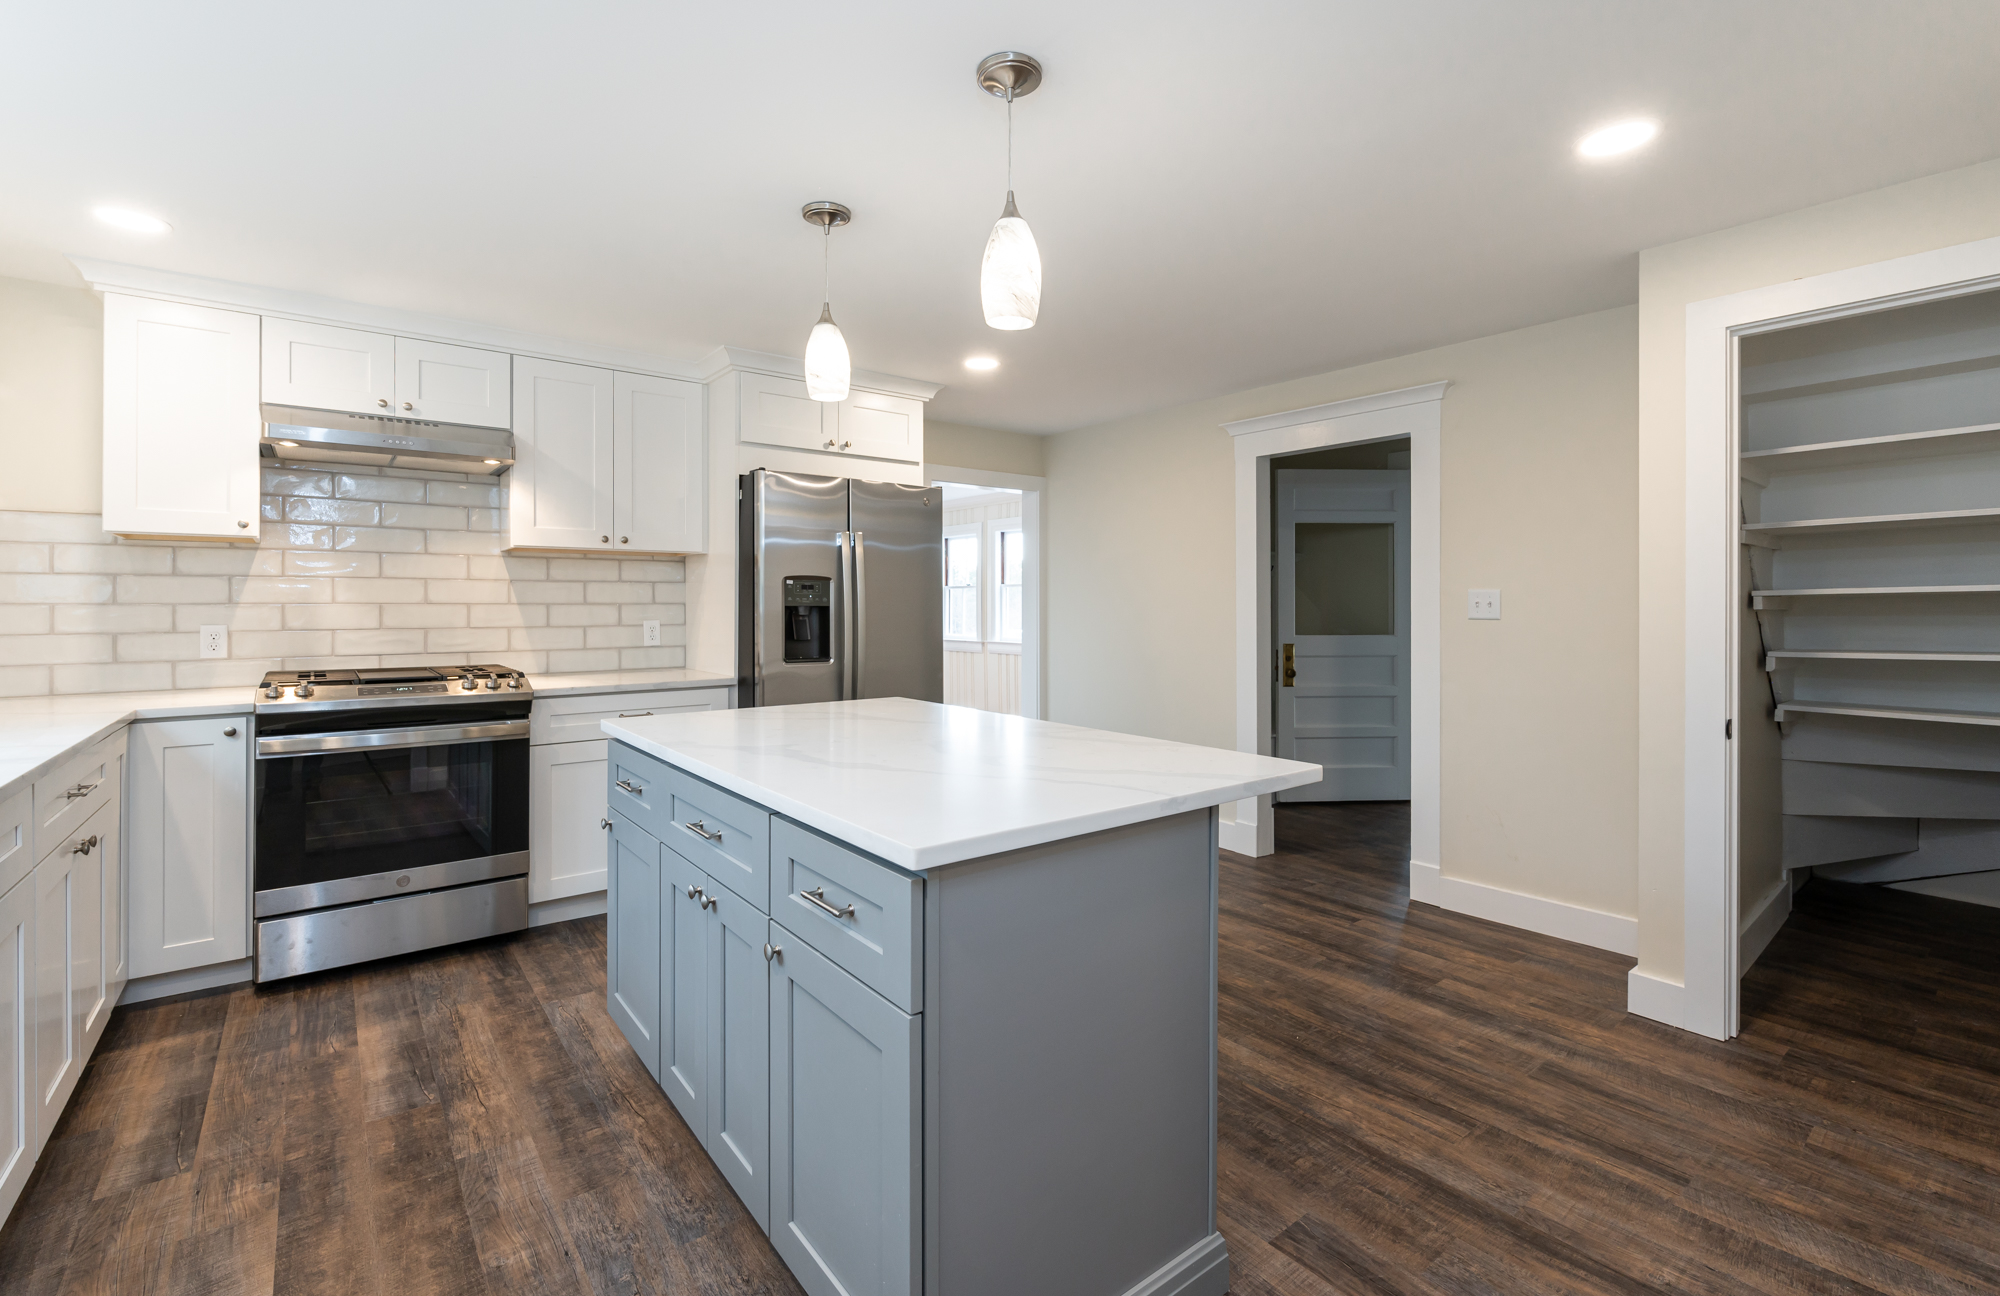 Beautifully remodeled kitchen with white marble countertops, white cabinets, stainless steel appliances, hardwood floors, white tile backsplash